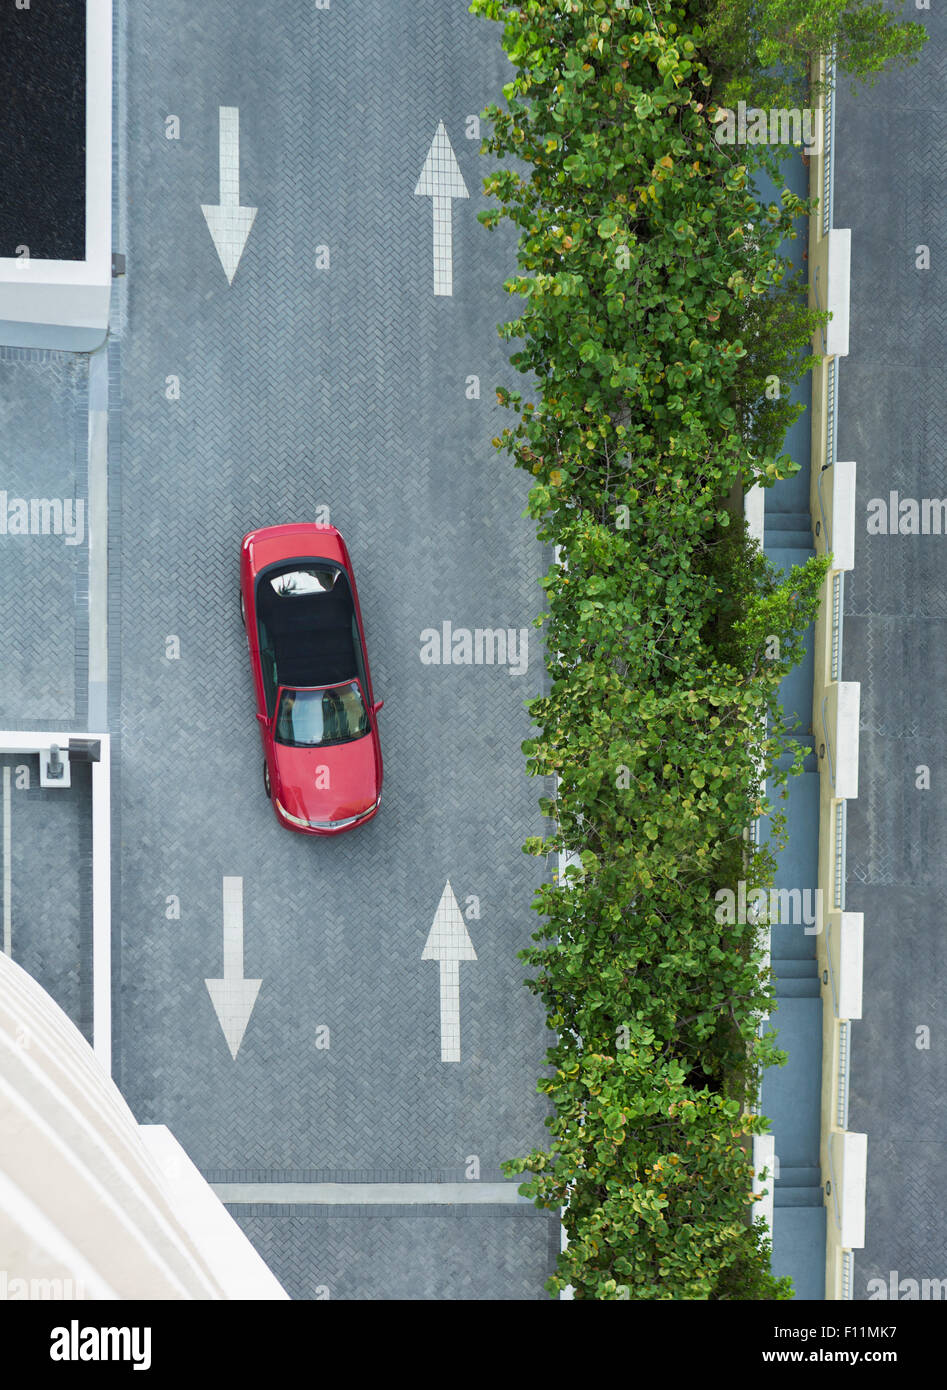 Aerial view of car driving on street with arrows Stock Photo